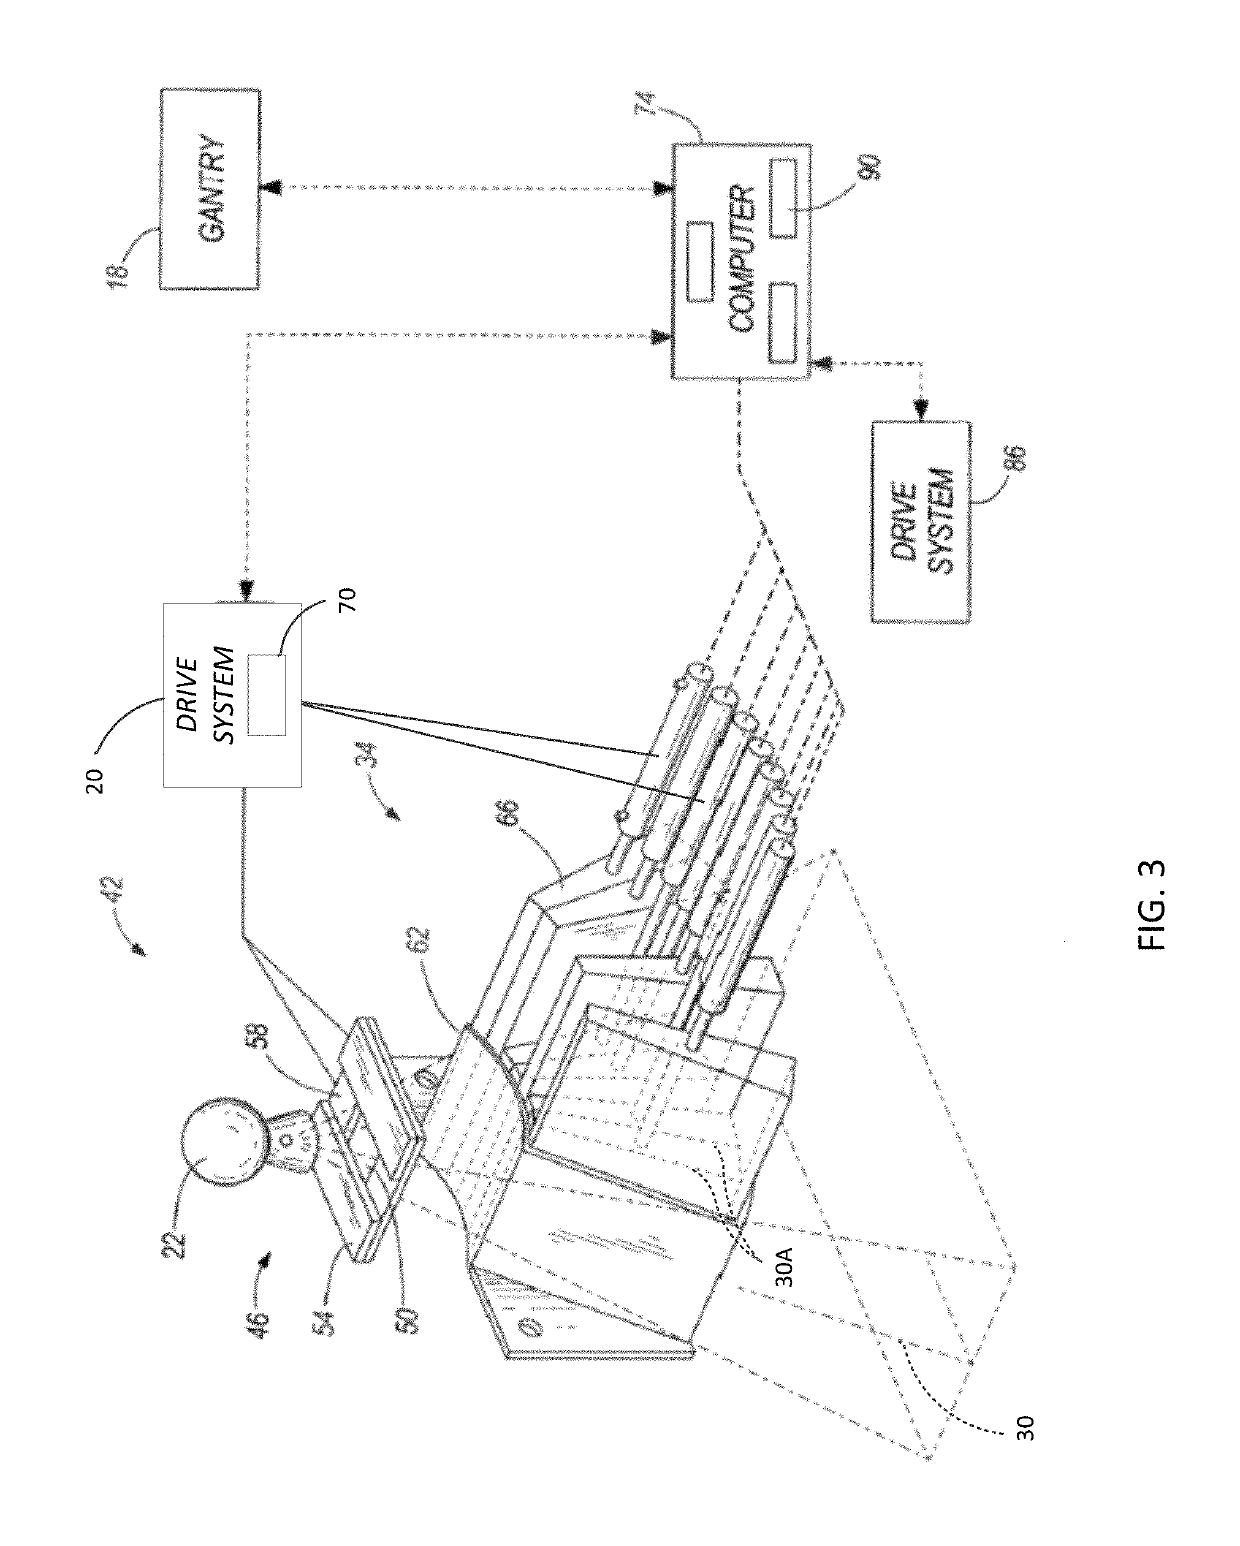 Systems and methods for selecting a radiation therapy treatment plan